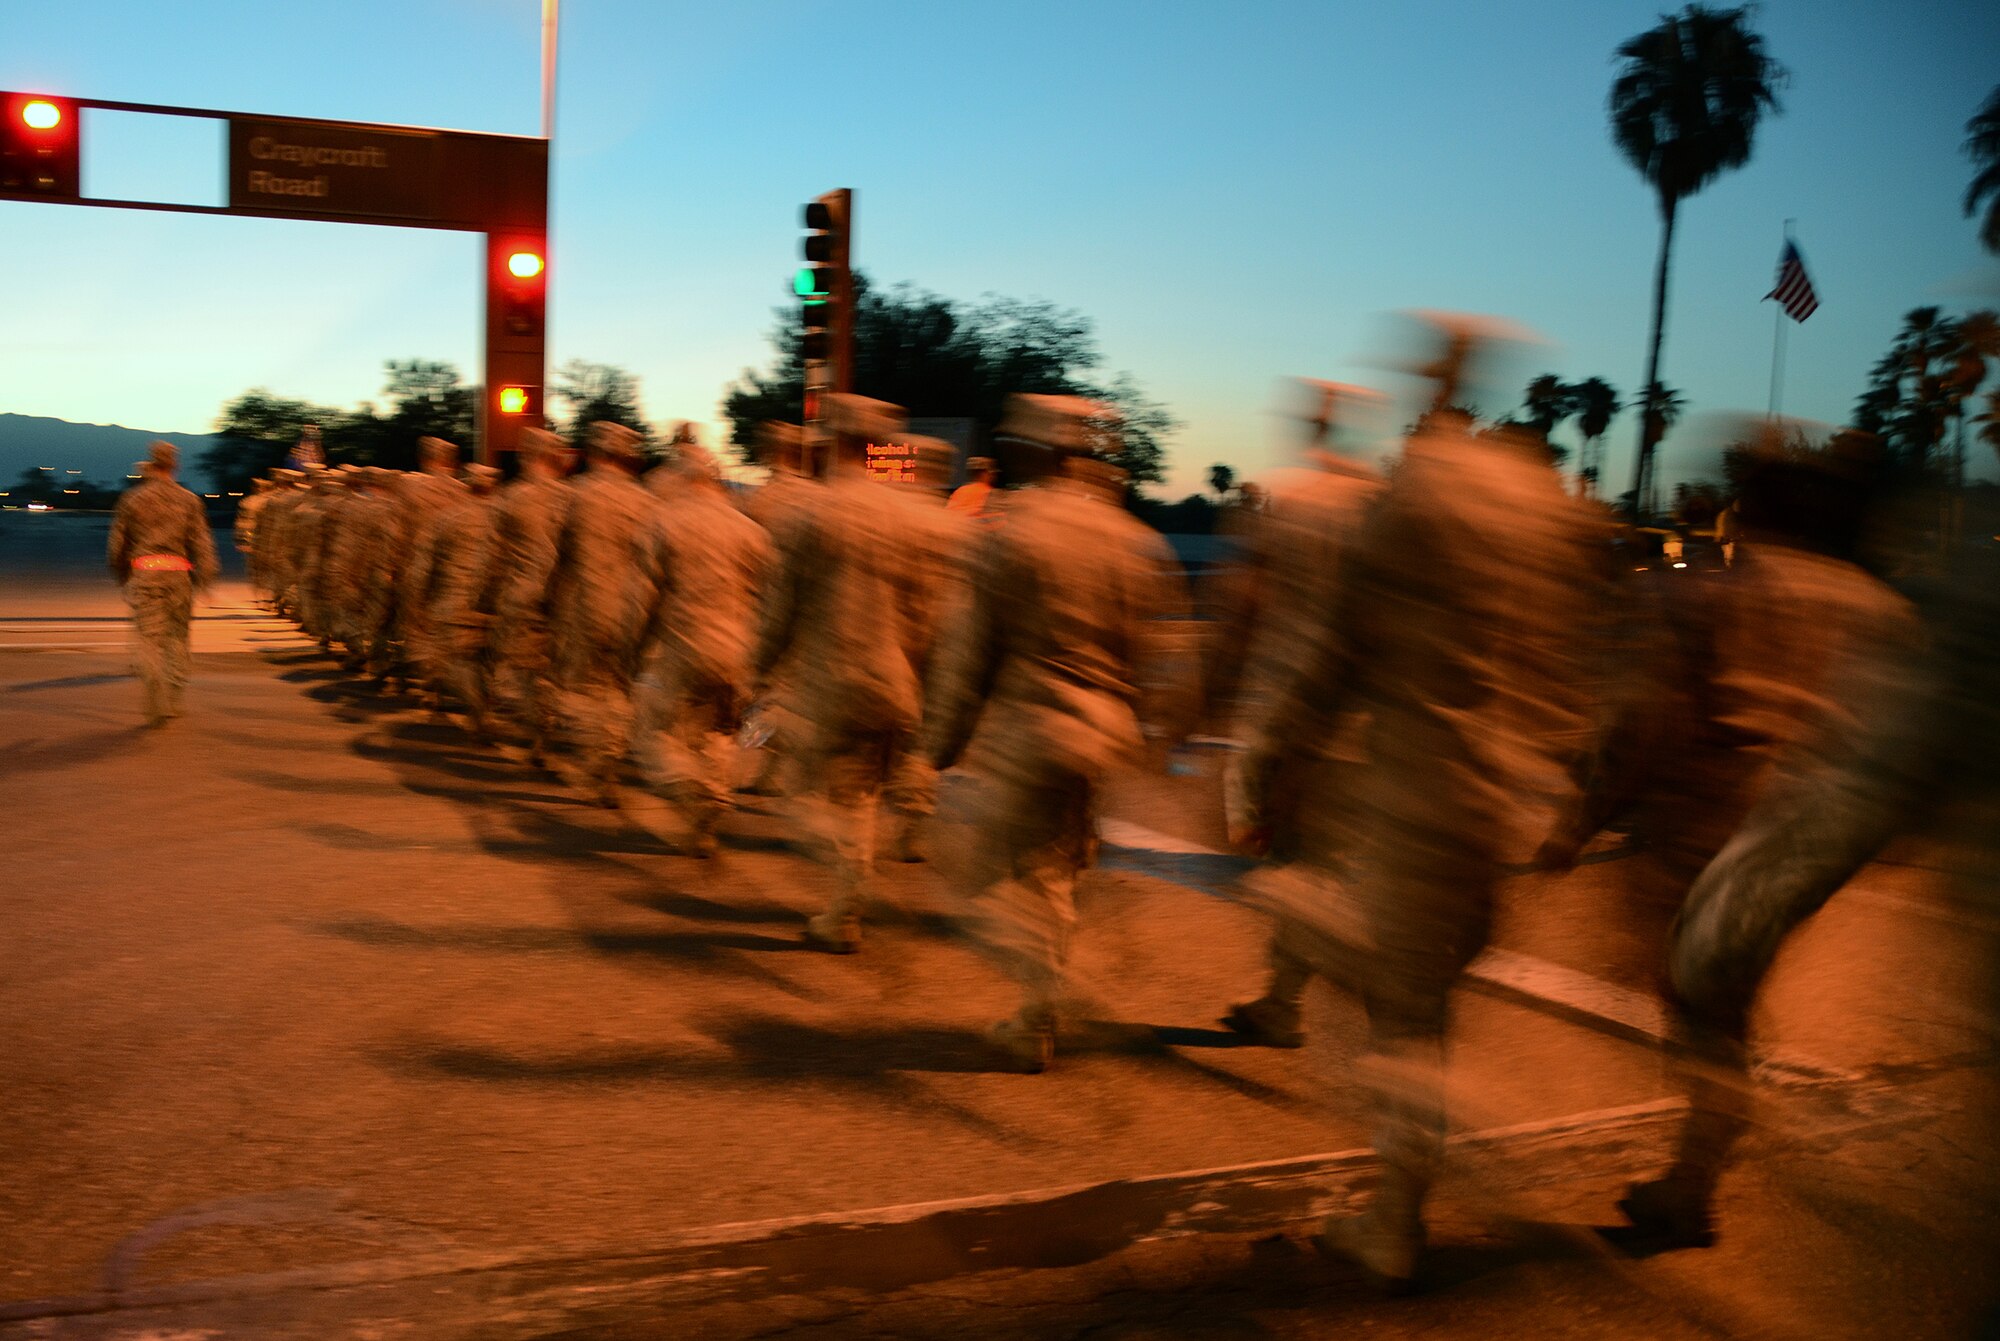 Members of the 612th Air Communication Squadron march around Davis-Monthan AFB, Ariz., in remembrance of the 9/11 victims, Sept. 11, 2013.  As members marched they recalled where they were during the attacks.  (USAF photo by Staff Sgt. Heather Redman/Released)